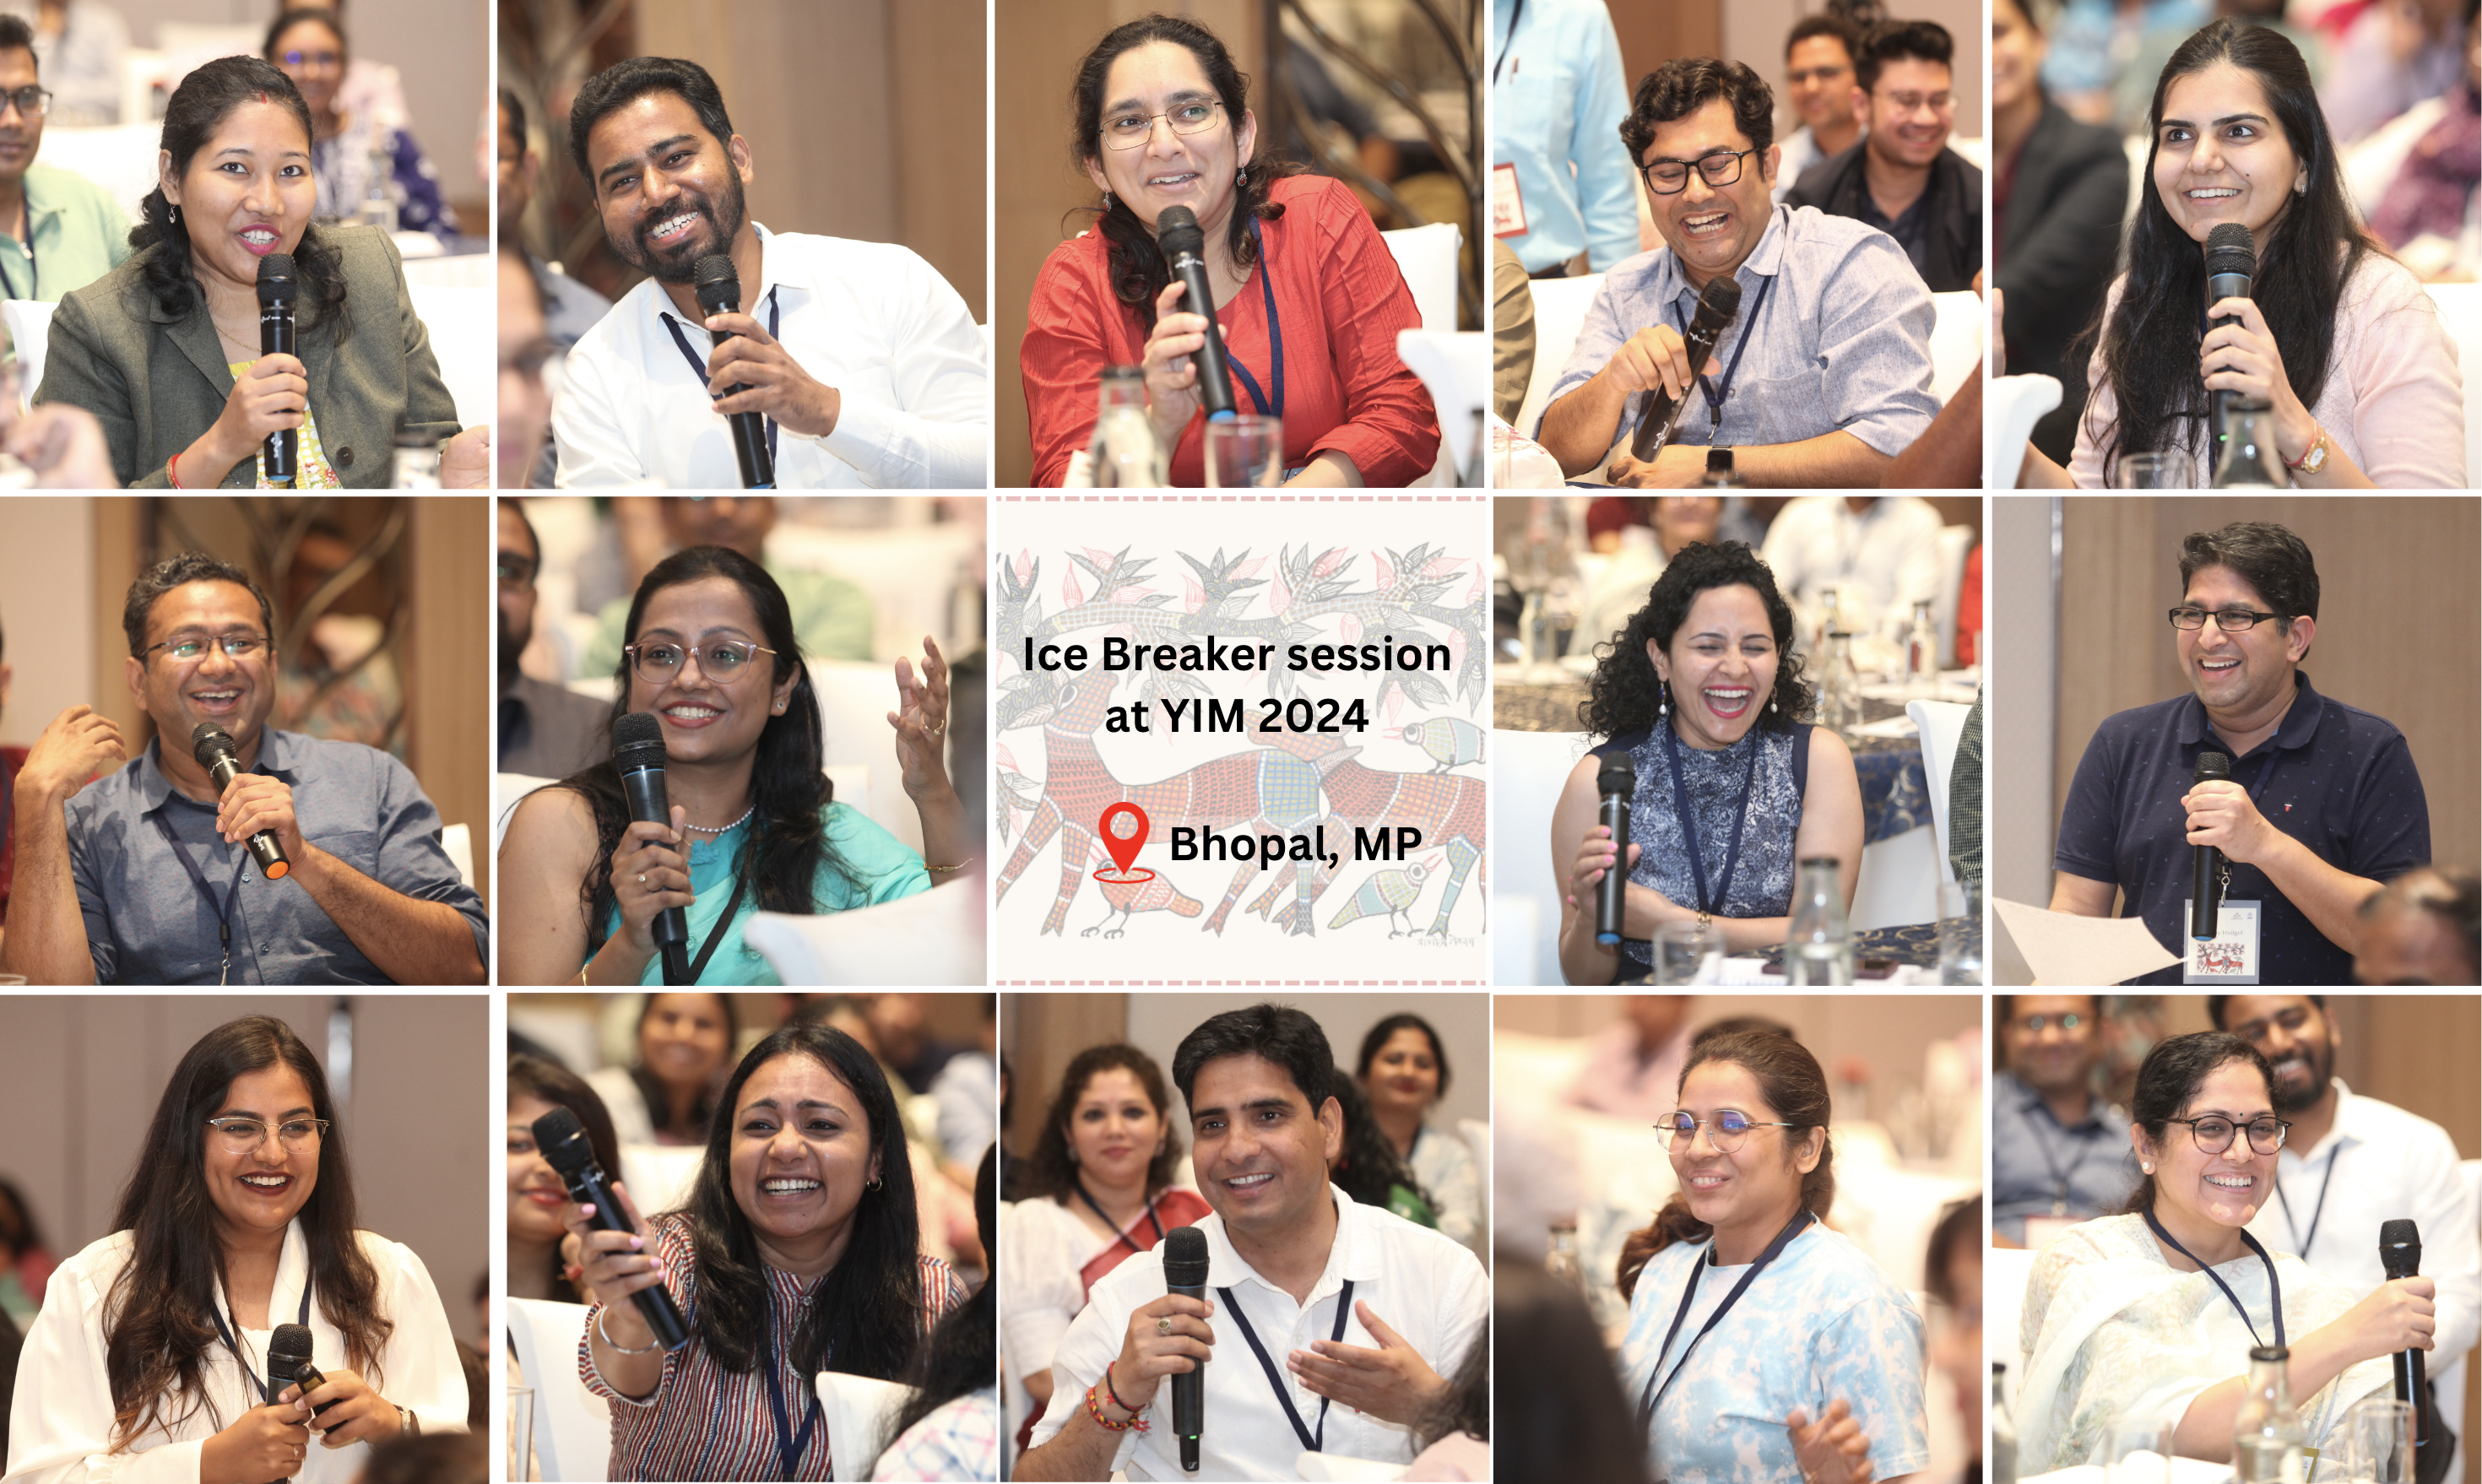 Ice breaker session at YIM 2024, collage by Ankita Rathore. Photo credits: IndiaBioscience